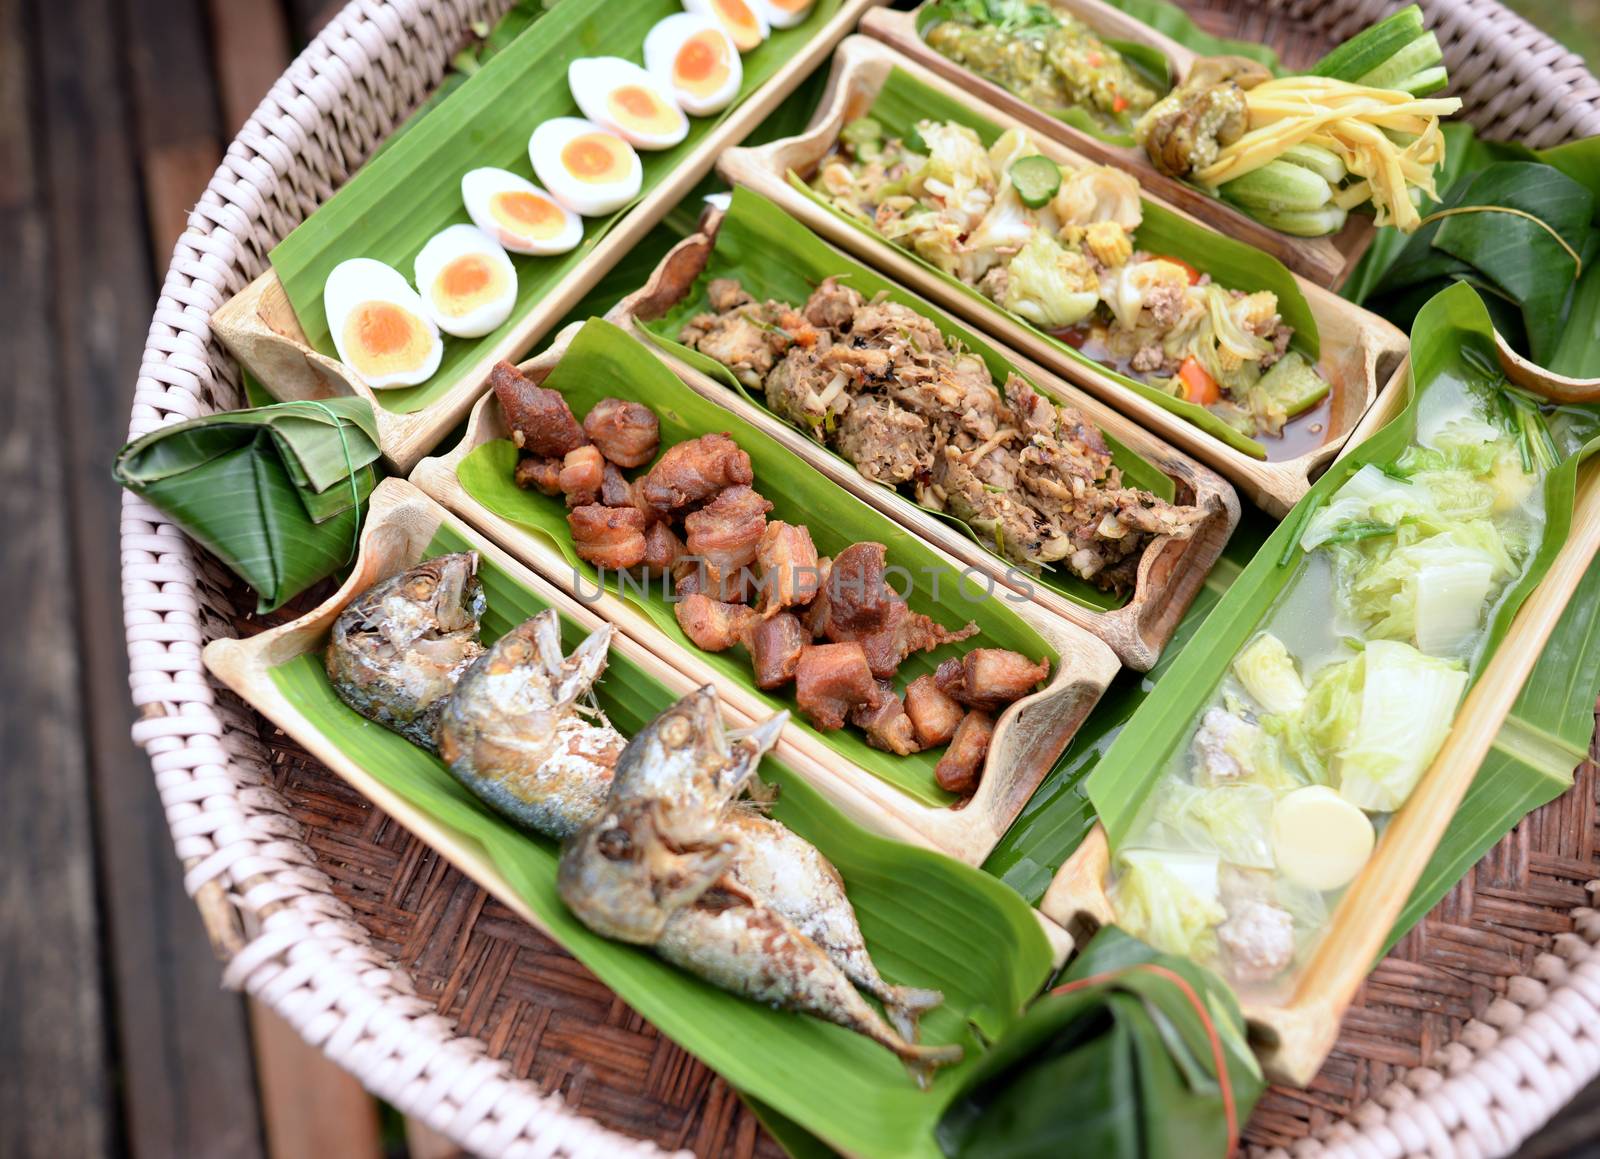 Fried mackerel, fried pork, boiled egg, clear soup, chili paste, boiled vegetables, stir-fried vegetables in a bamboo tube, cut in half, Secondary with banana leaf